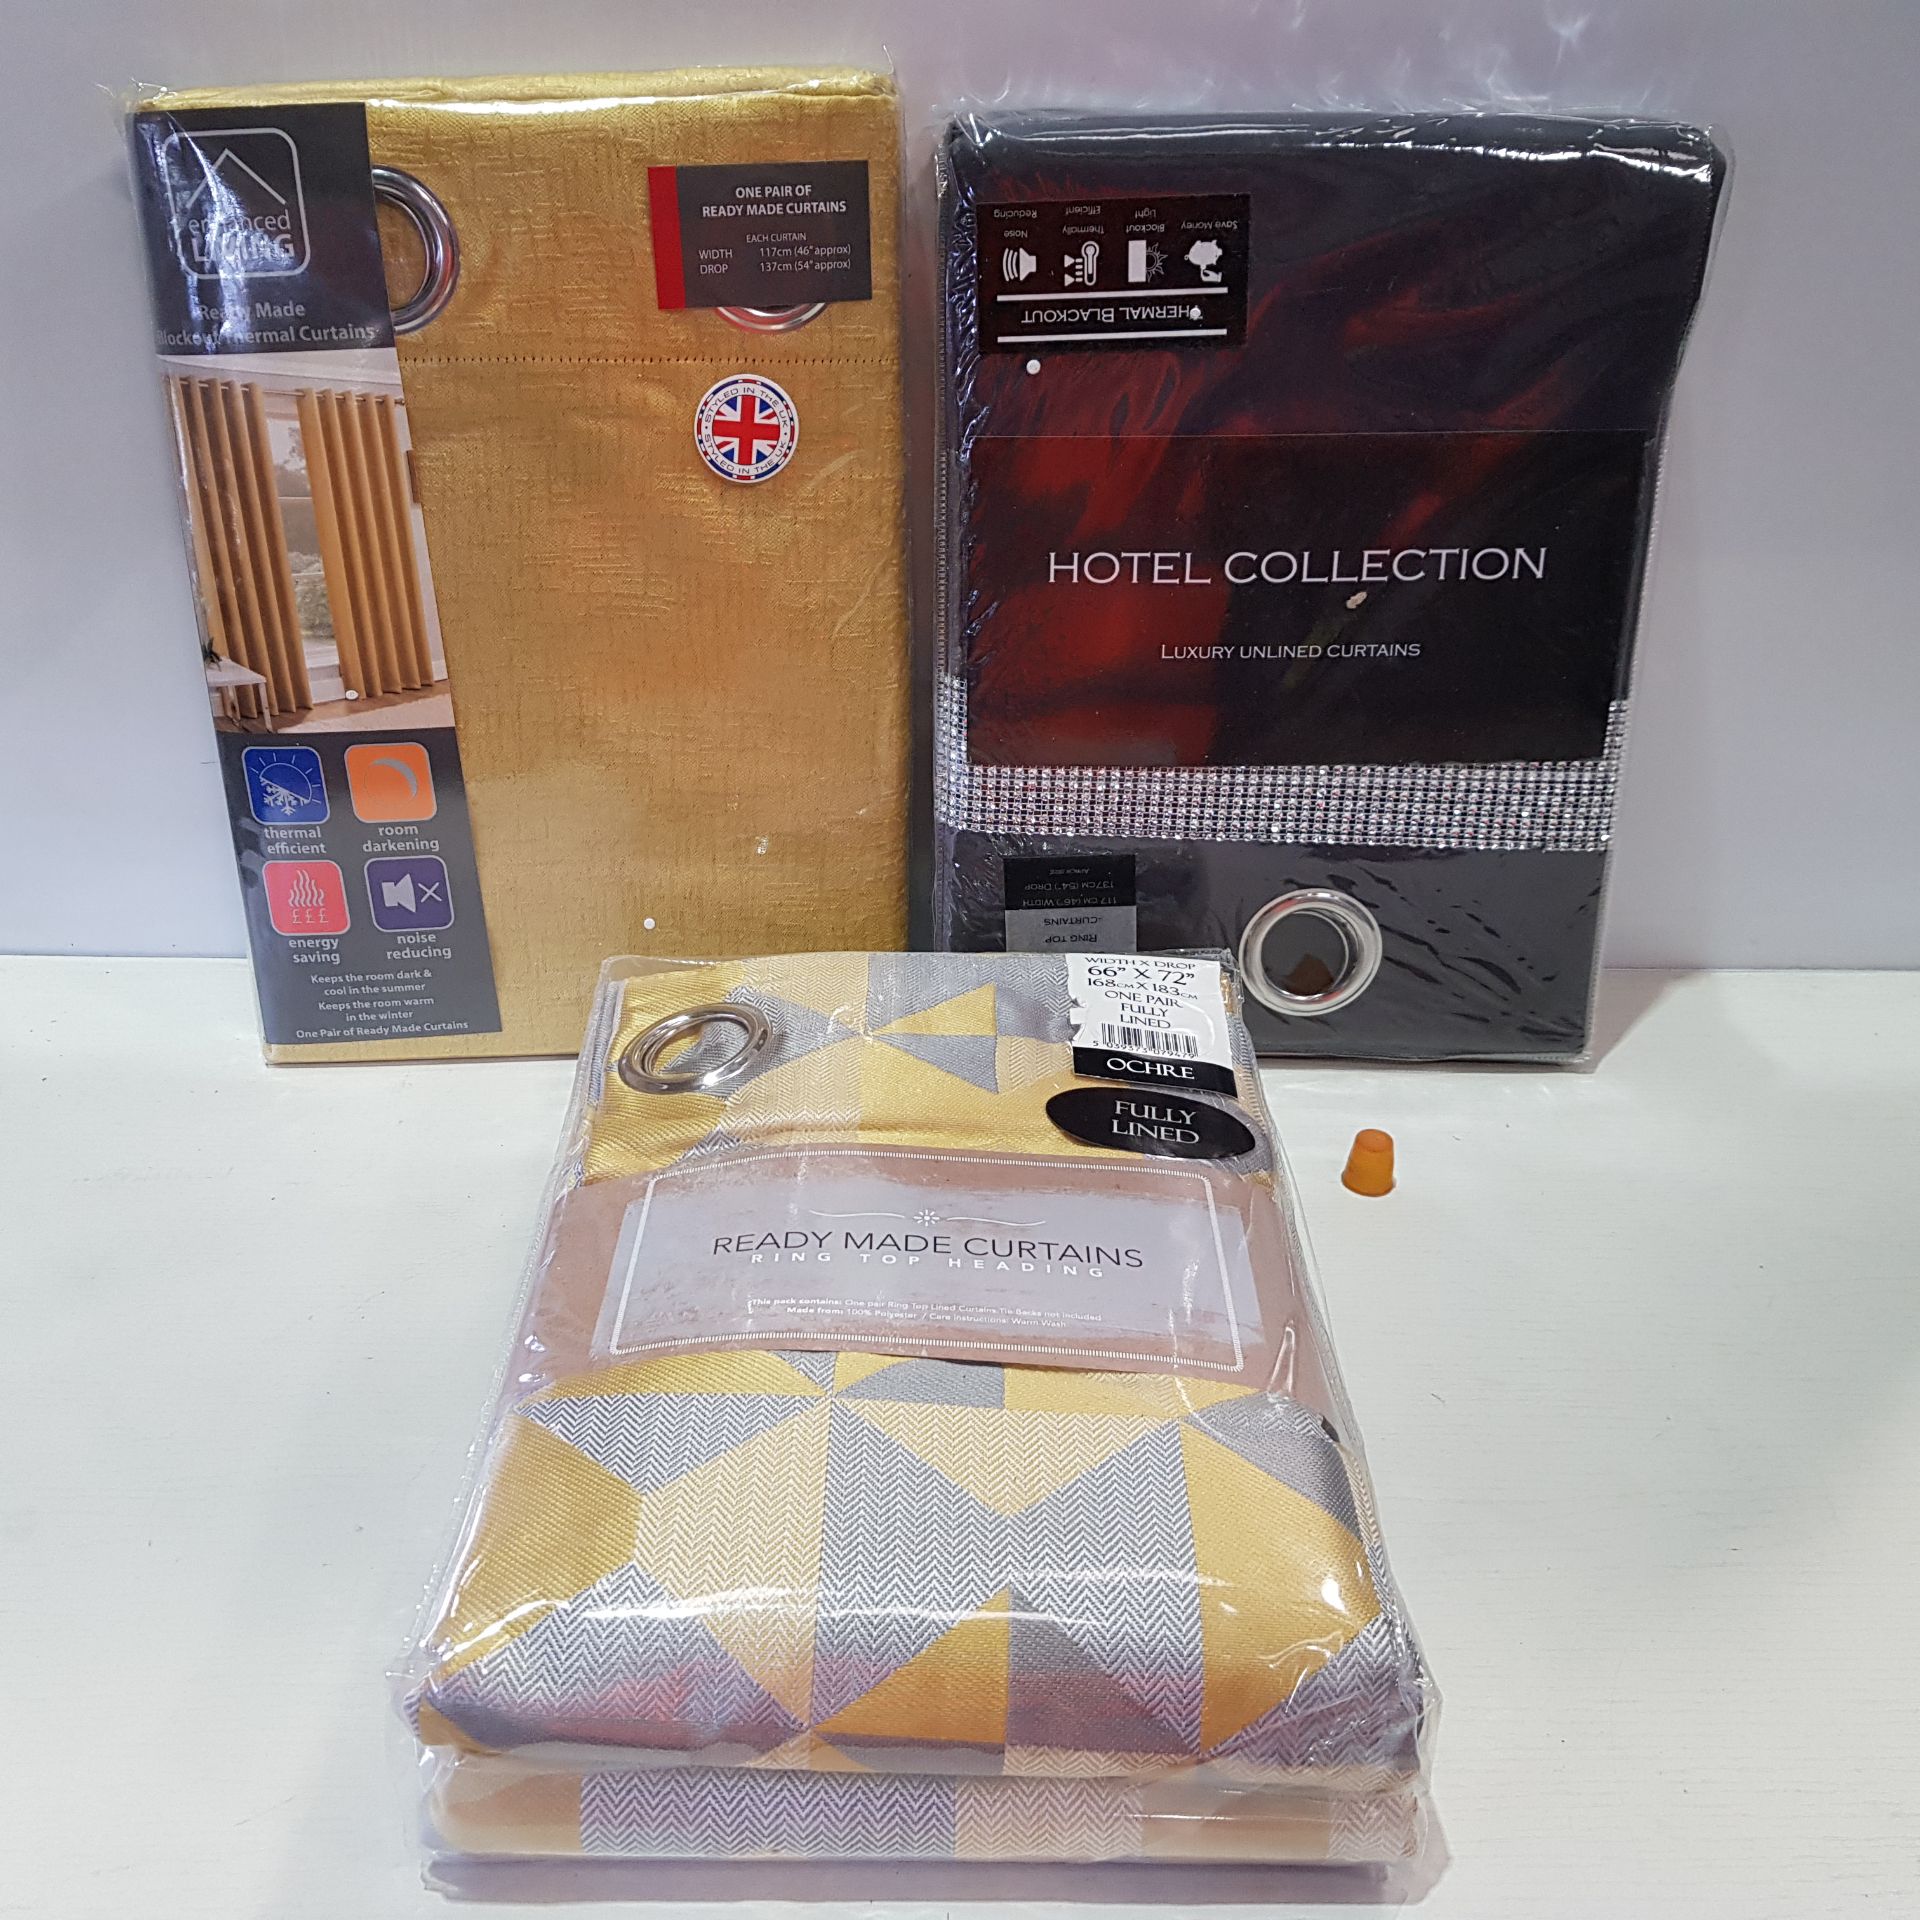 30 X BRAND NEW ENHANCED LIVING- SKANDI AND HOTEL COLLECTION MIXED CURTAIN LOT CONTAINING THERMAL